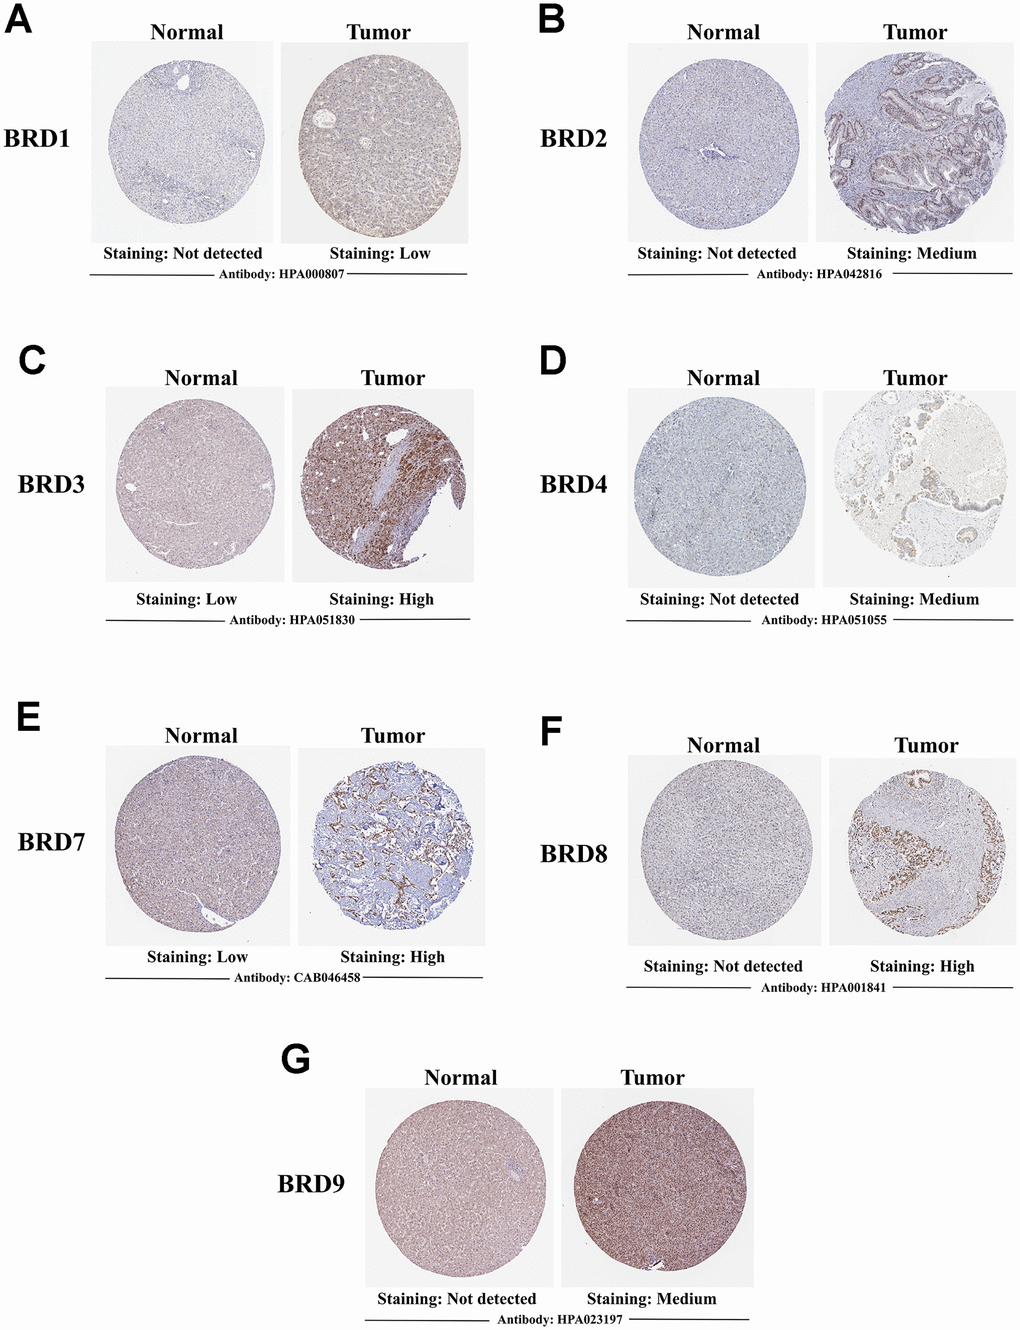 Representative immunohistochemistry images of 7 distinct BRD-containing proteins in HCC tissues and normal liver tissues (Human Protein Atlas). BRD1/2/4/8/9 were not expressed in normal liver tissues, while their low and medium protein expressions were observed in HCC tissues (A, B, D, F, G). Low expressions of BRD3/7 were observed in normal liver tissues, while their medium and high protein expressions were found in HCC tissues (C, E).